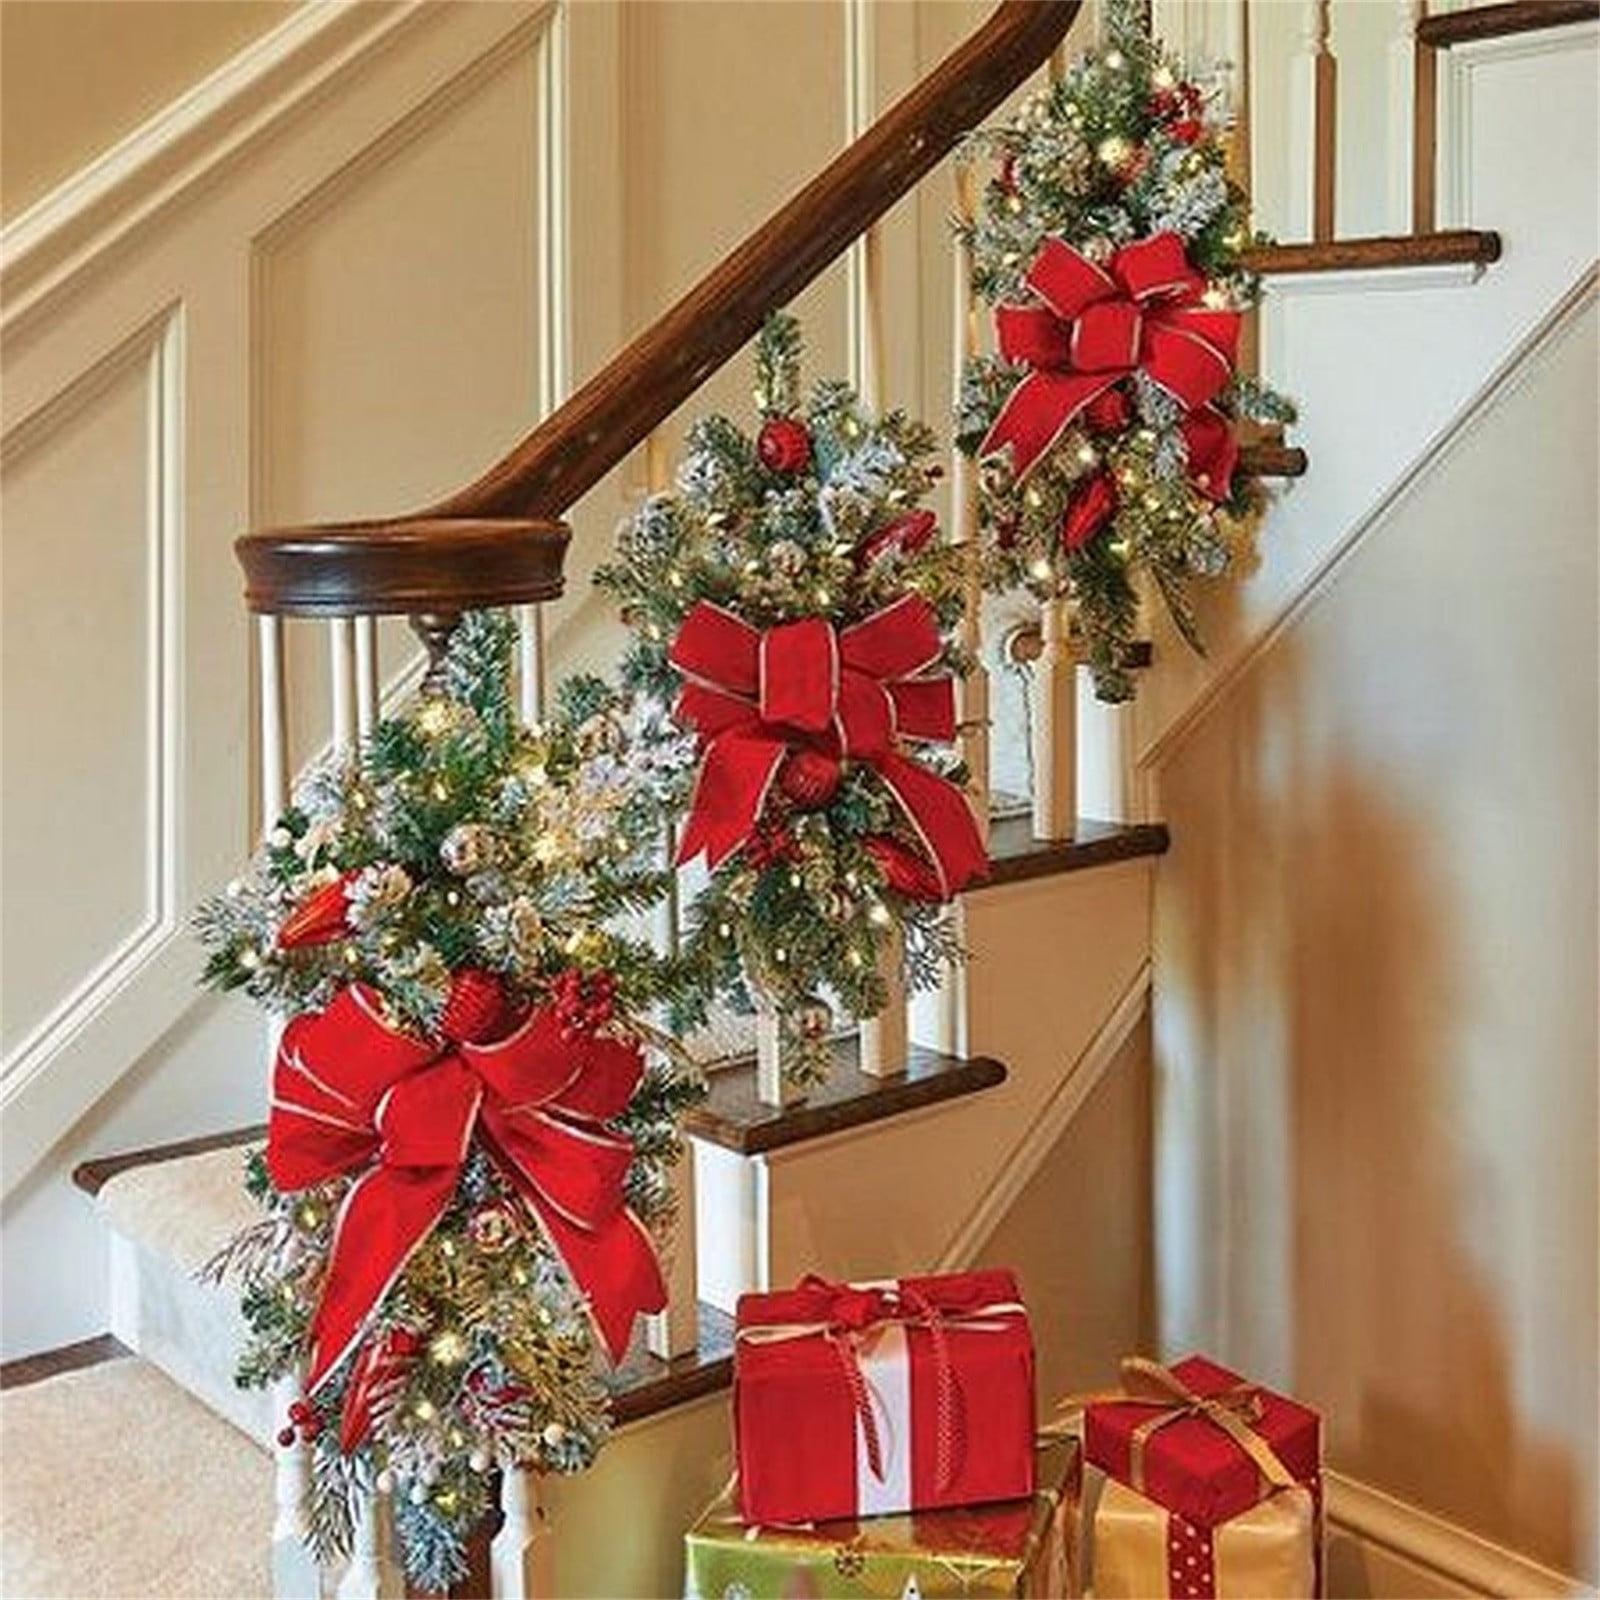 Christmas stair decorating: The best decorating ideas that will bring in  the festive spirit!